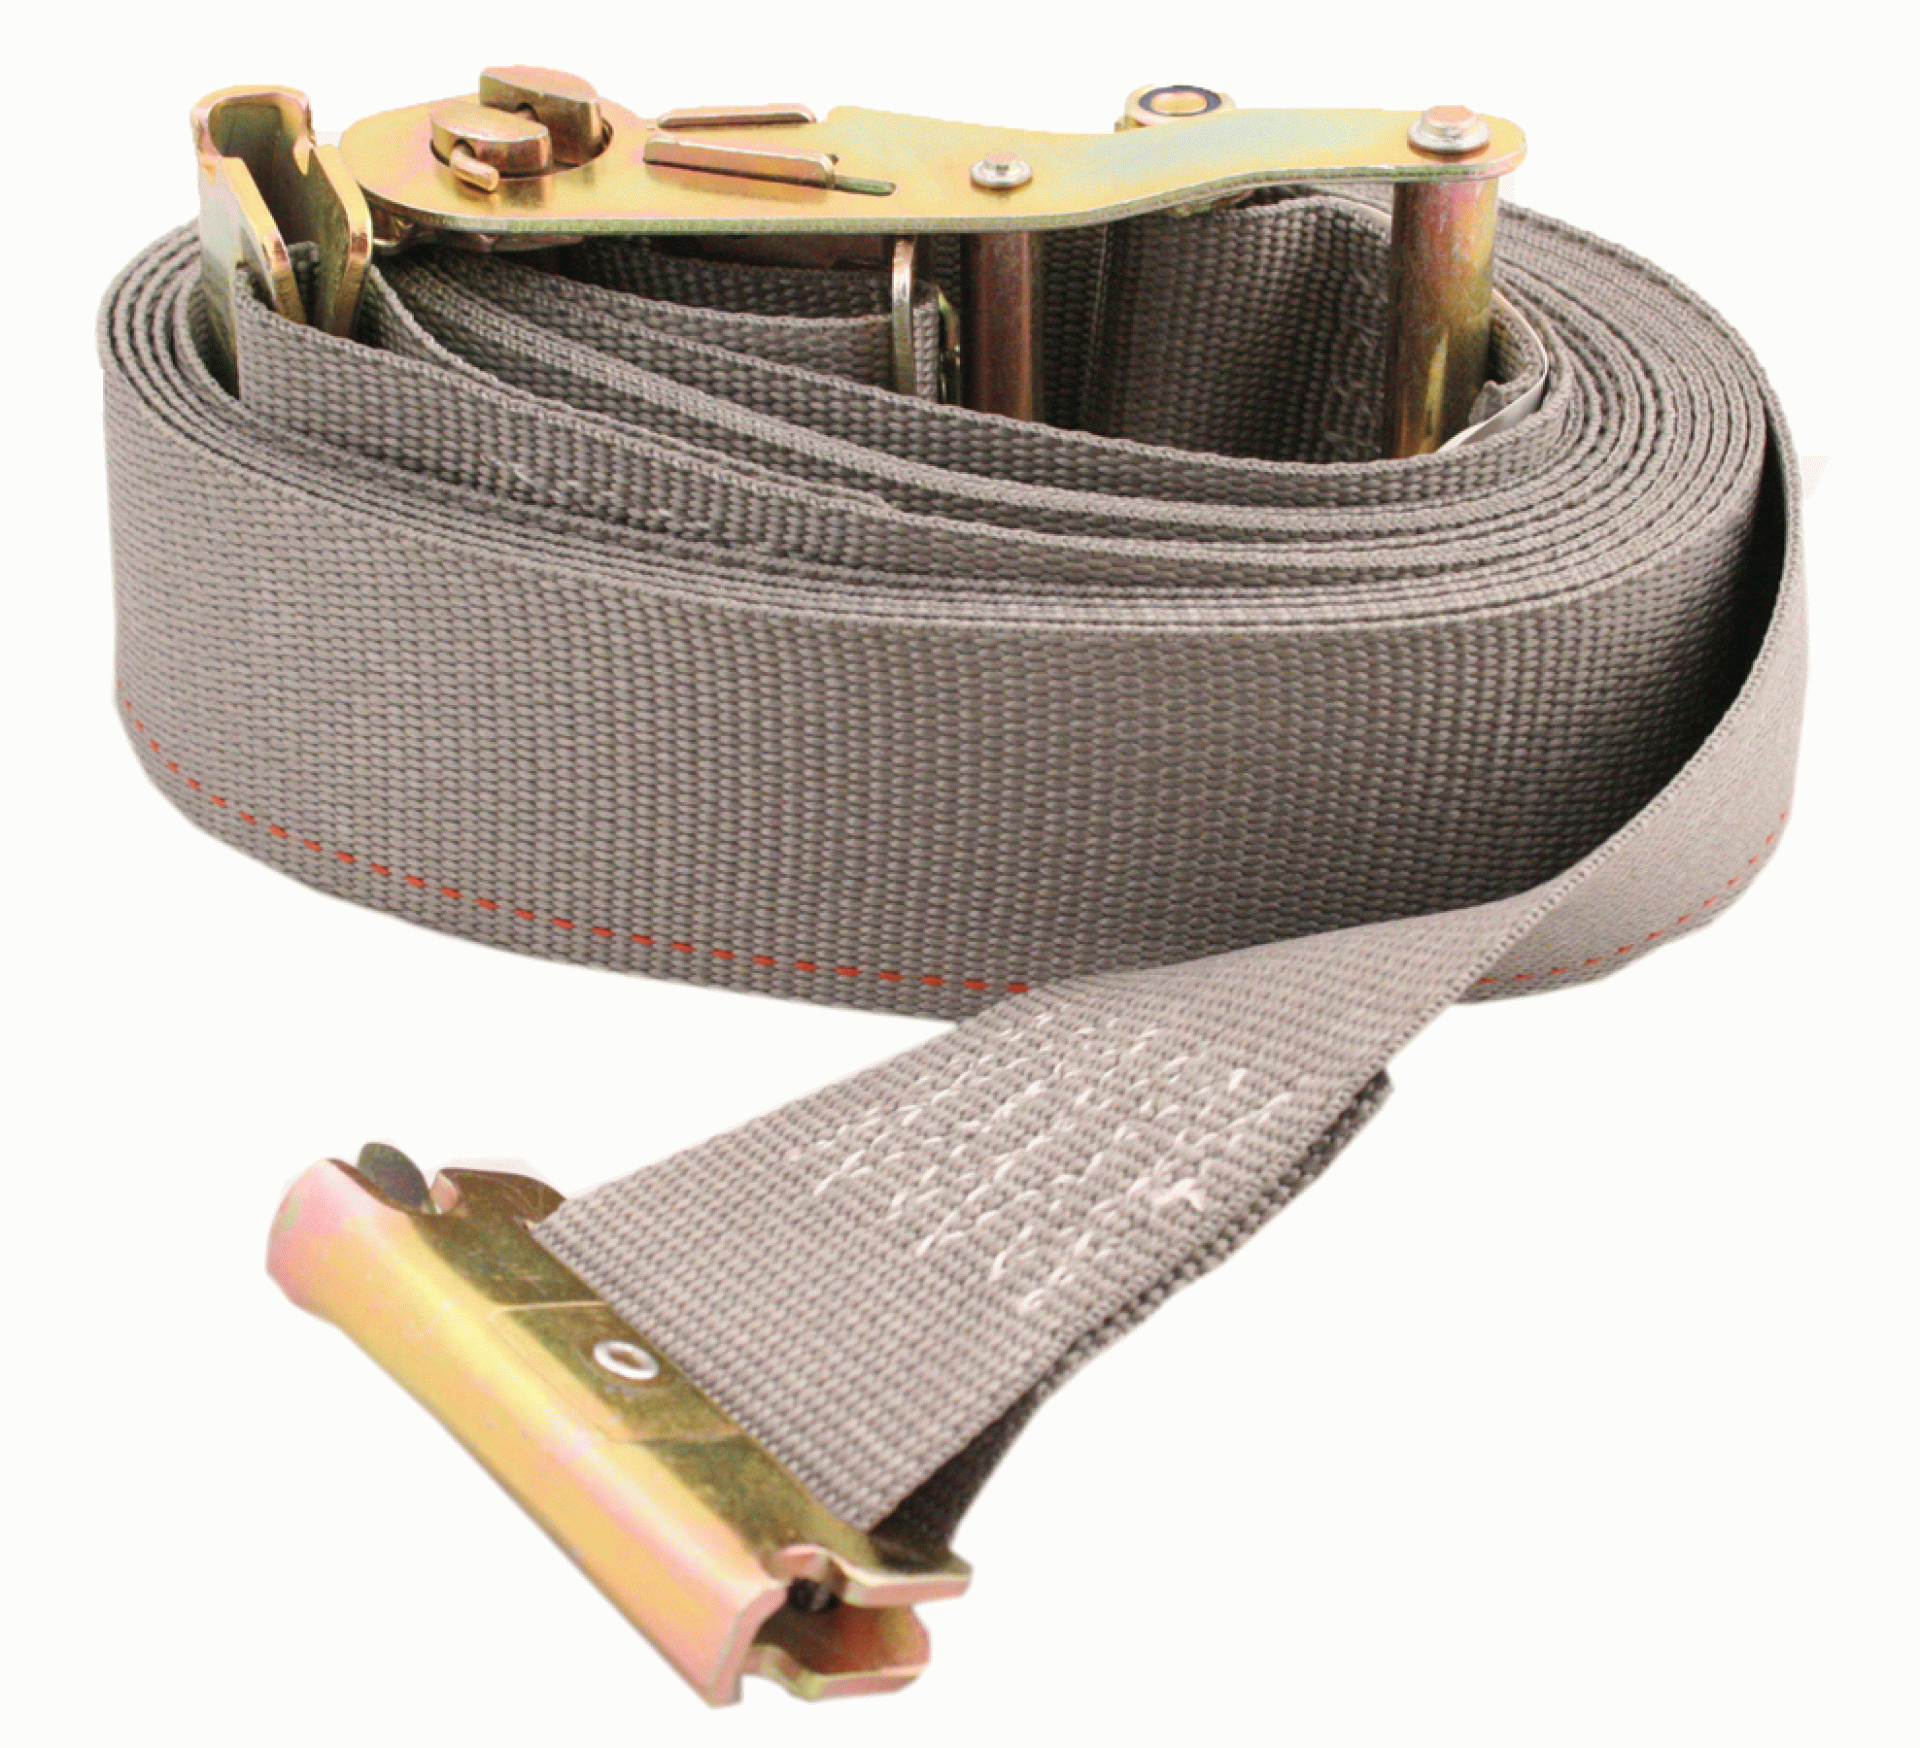 BUYERS PRODUCTS COMPANY | 01076 | STRAP RATCHET 2" X 16'